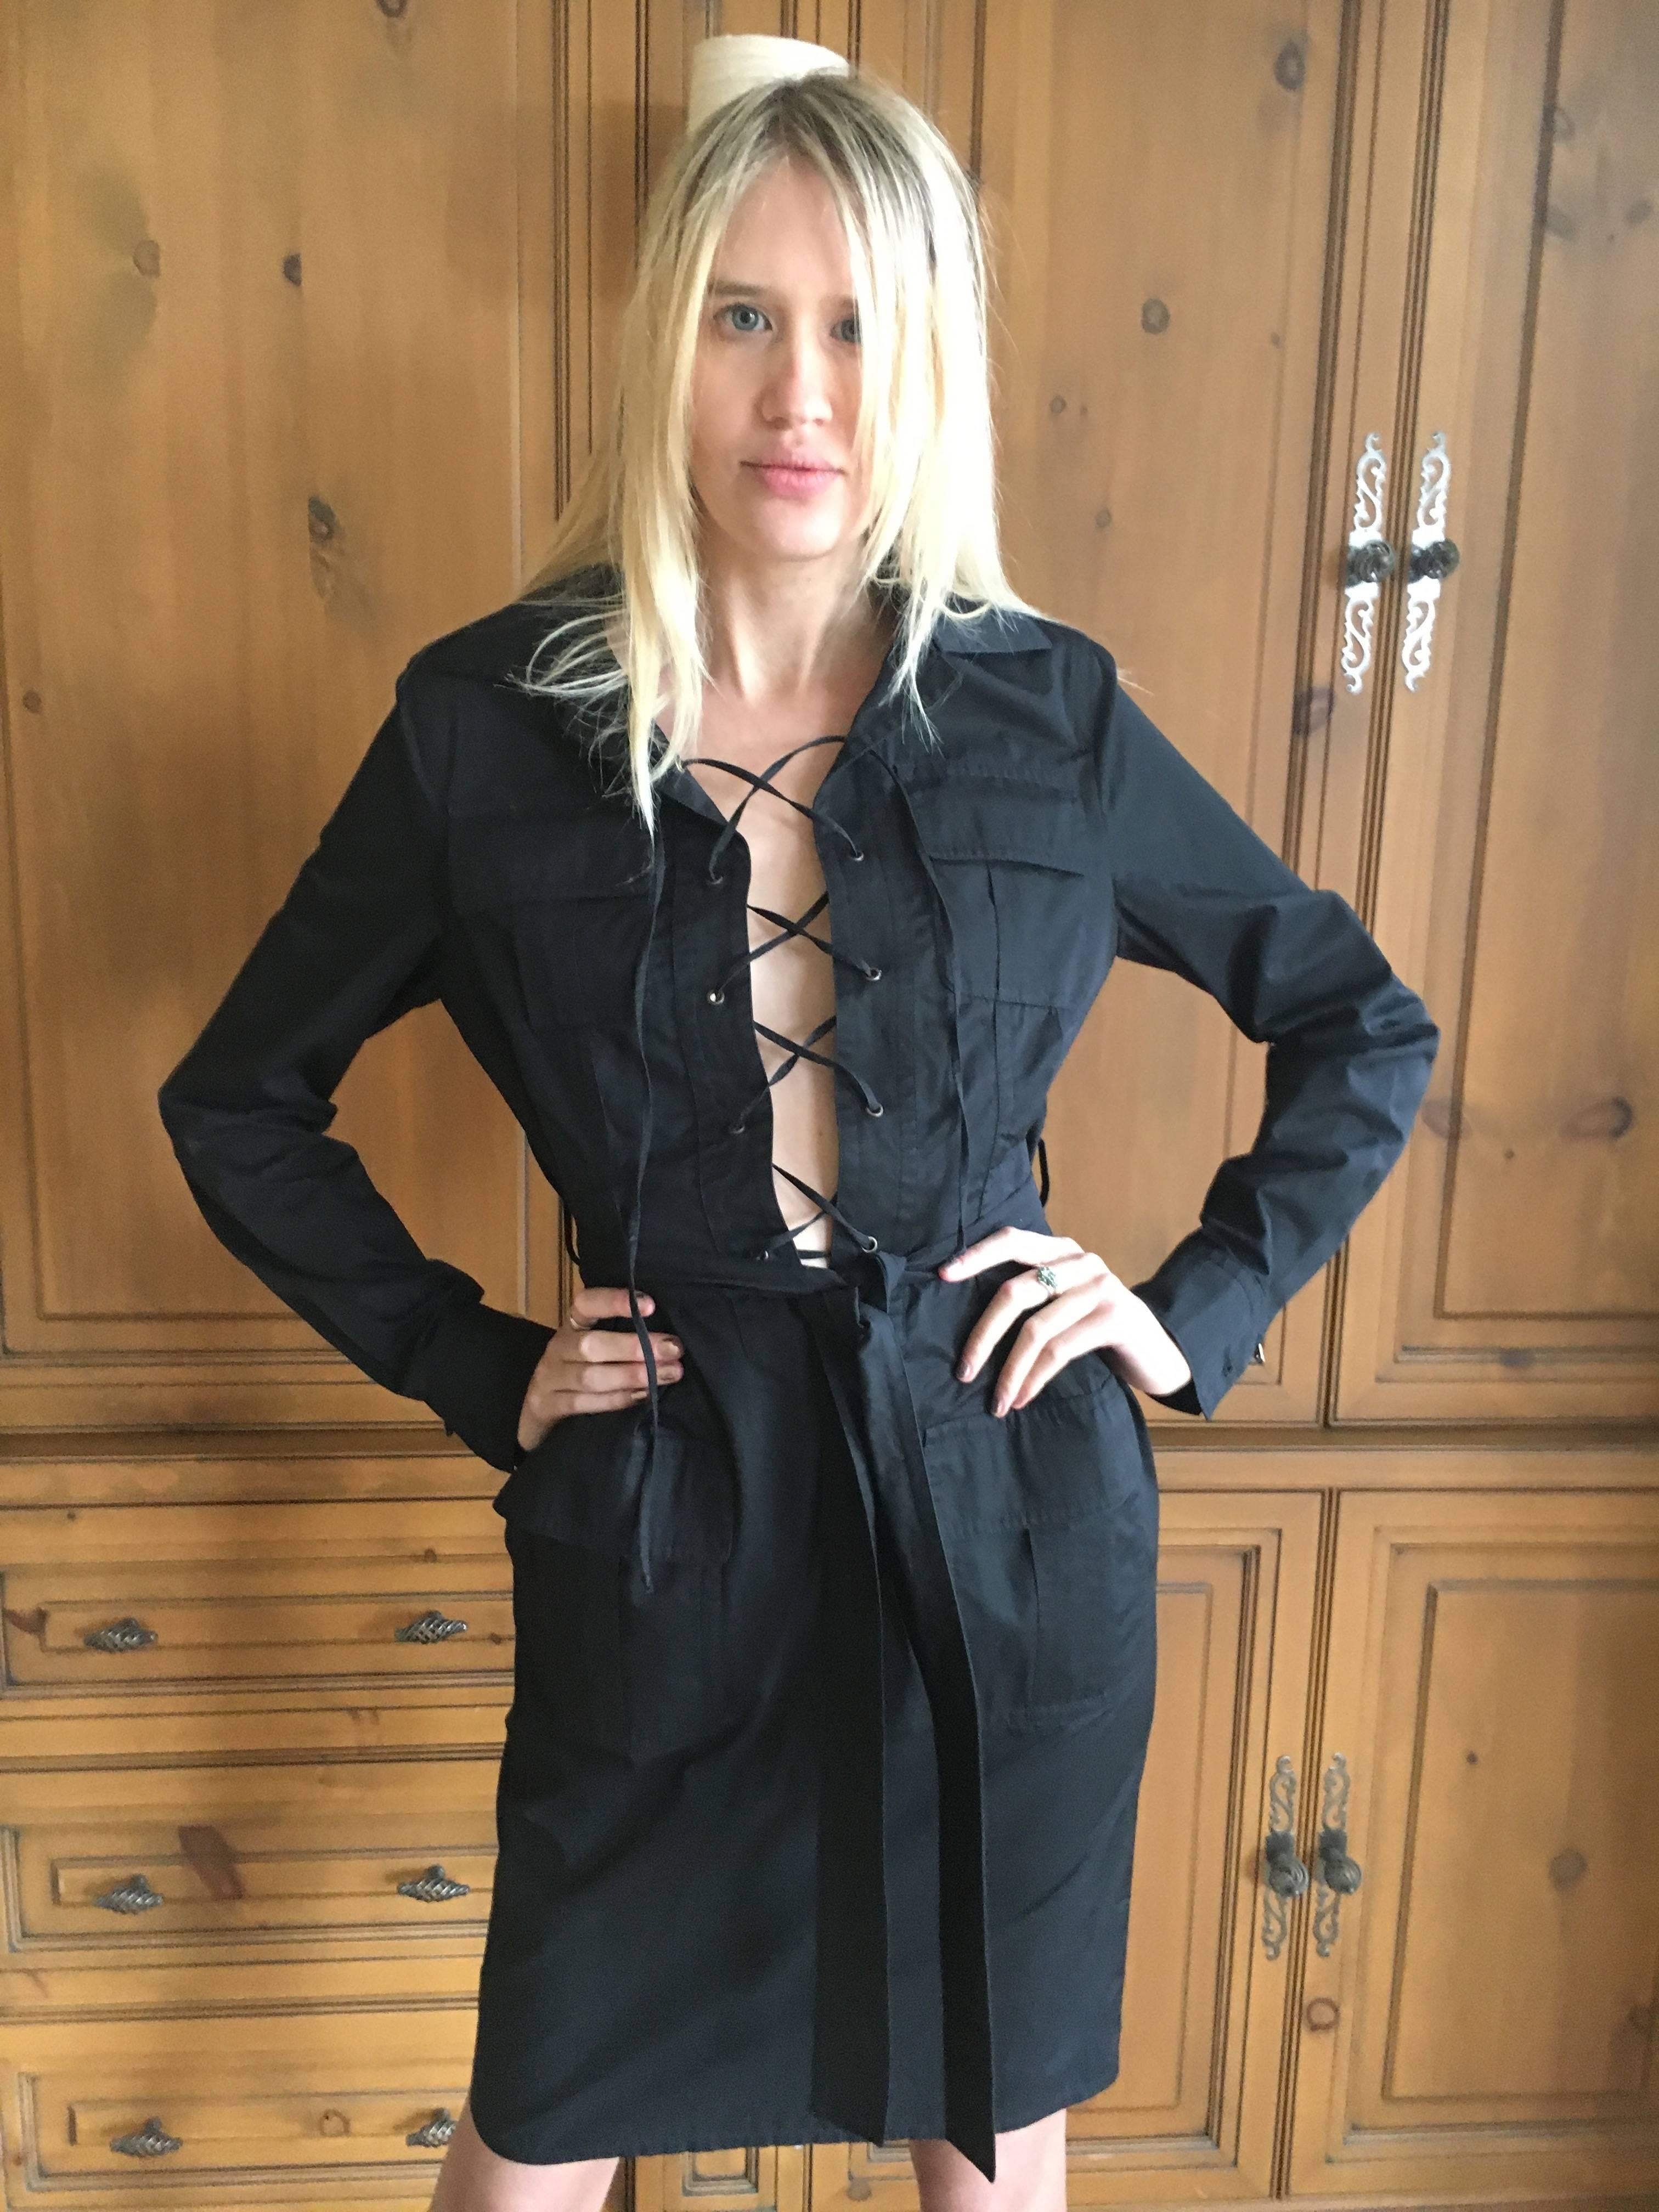 Yves Saint Laurent Tom Ford Black Cotton Safari Dress In Excellent Condition For Sale In Cloverdale, CA